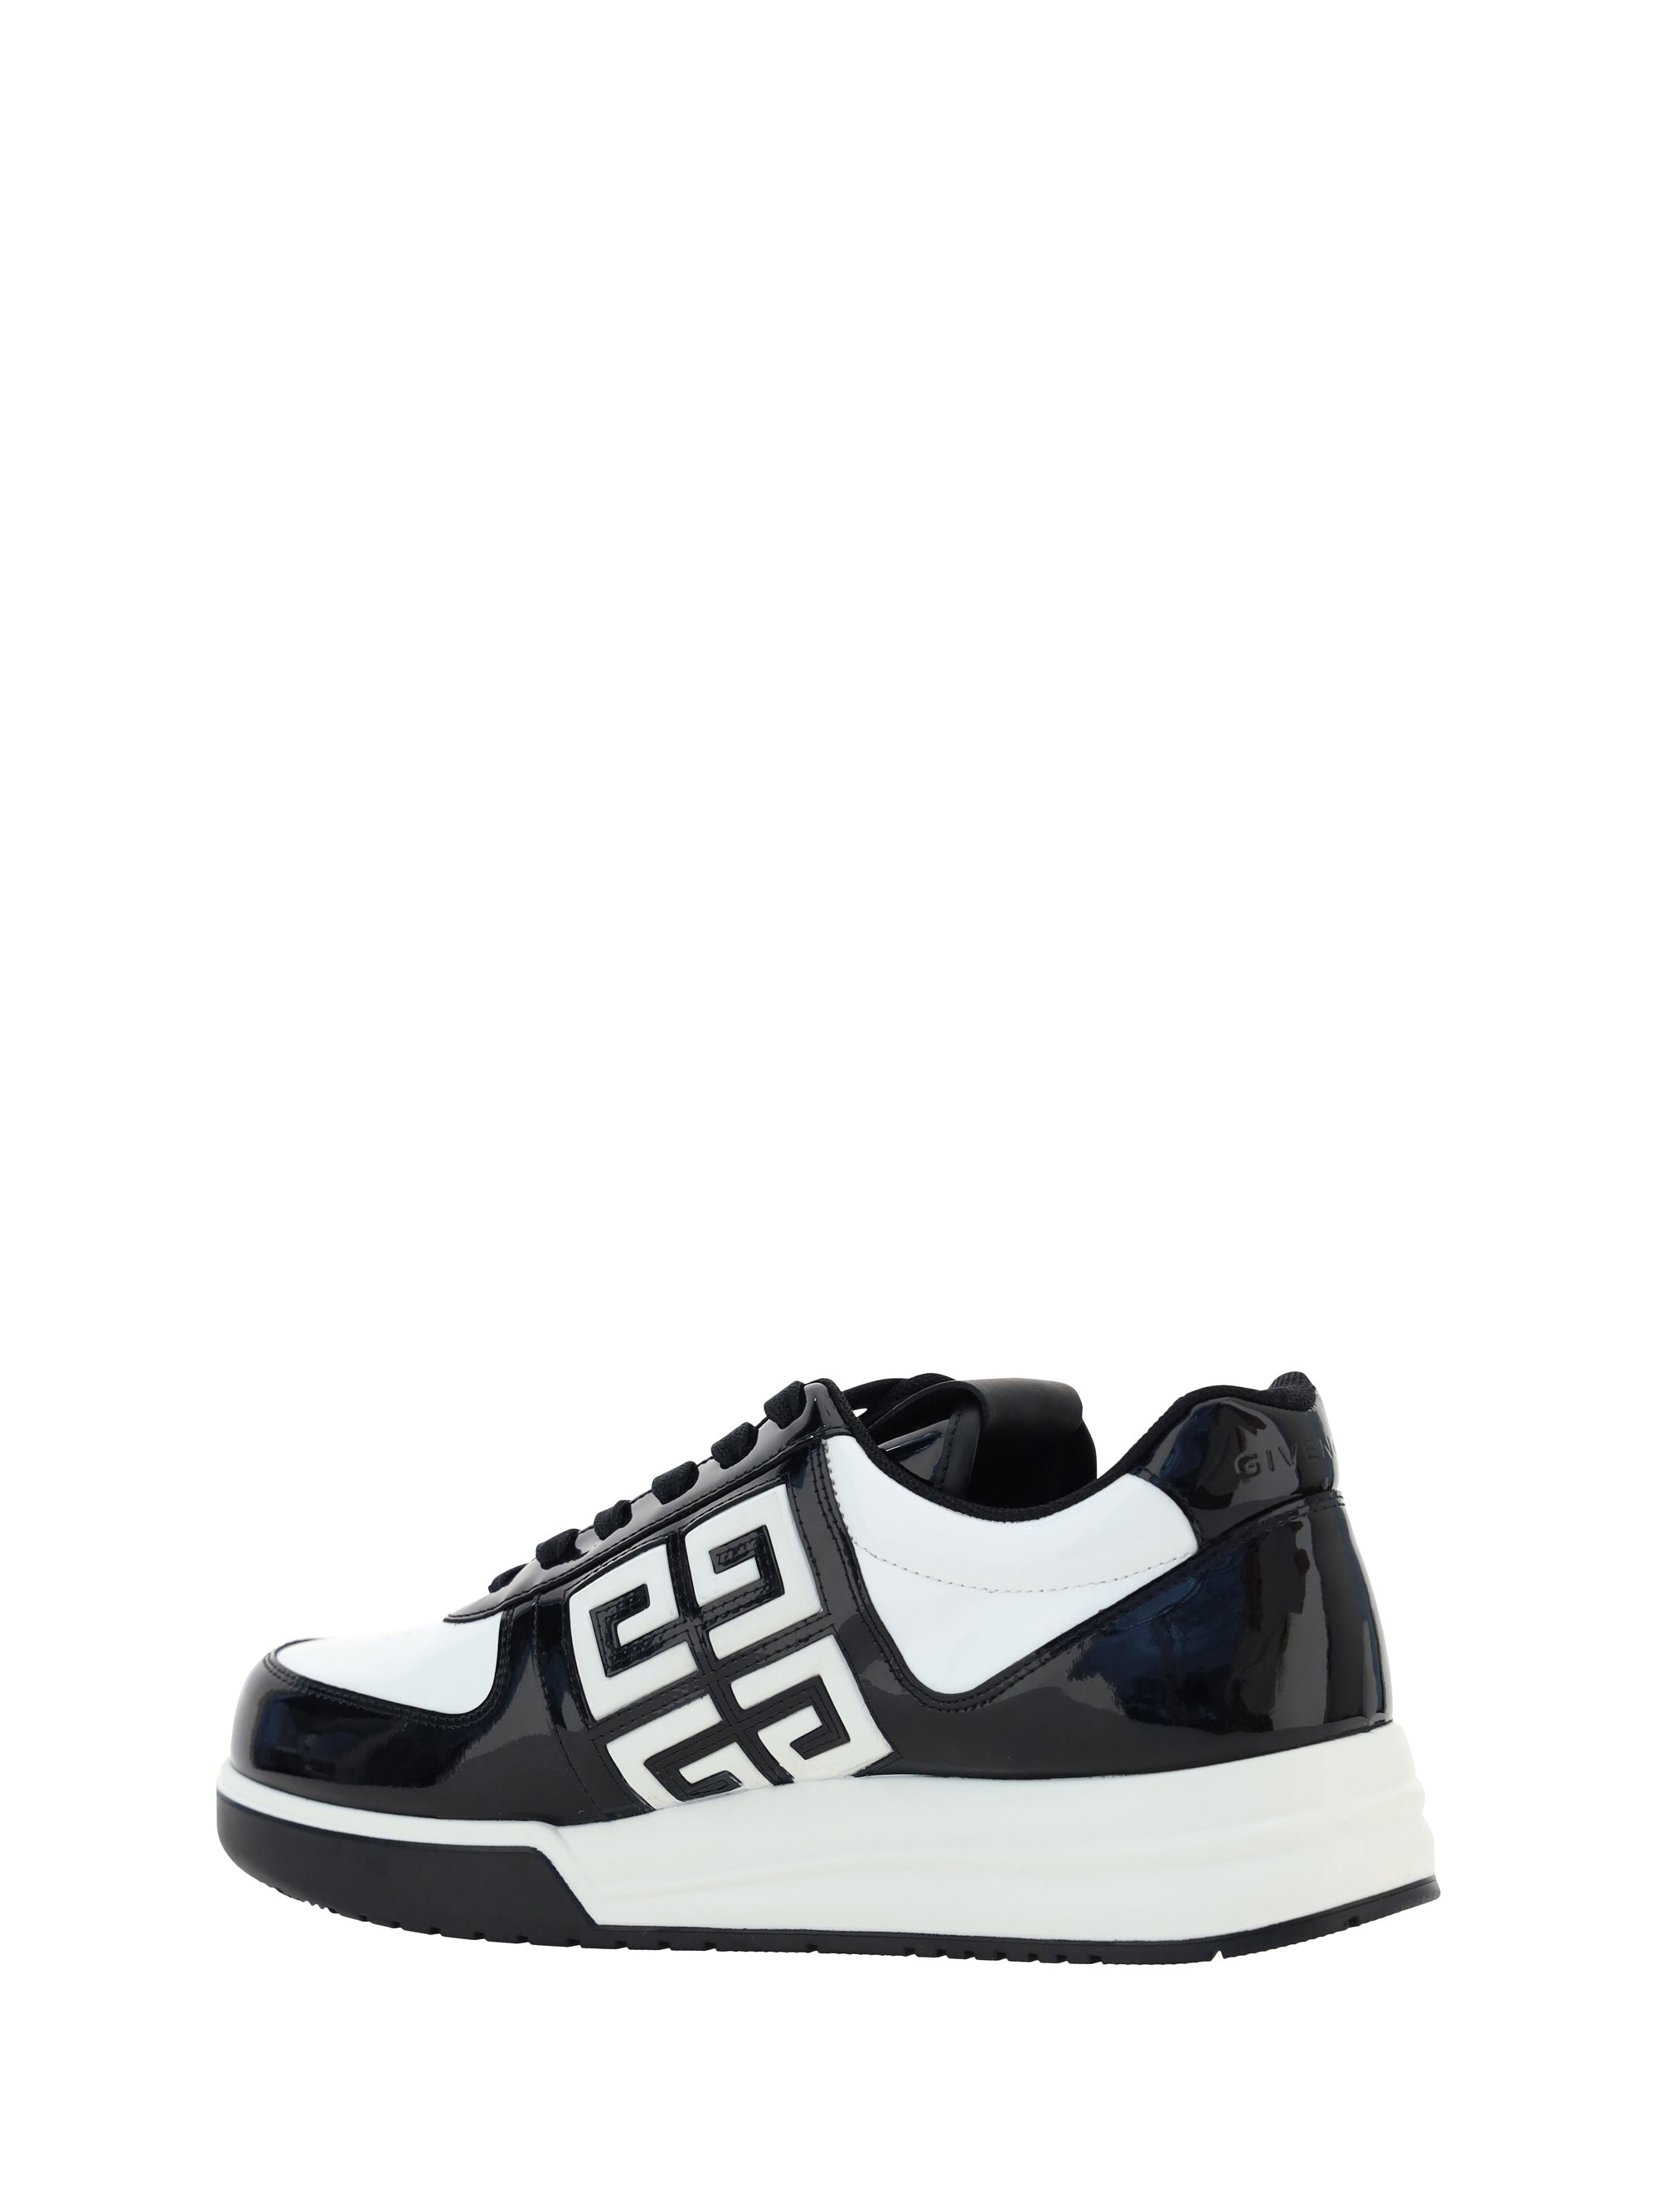 Givenchy Men G4 Low Top Sneakers - 3